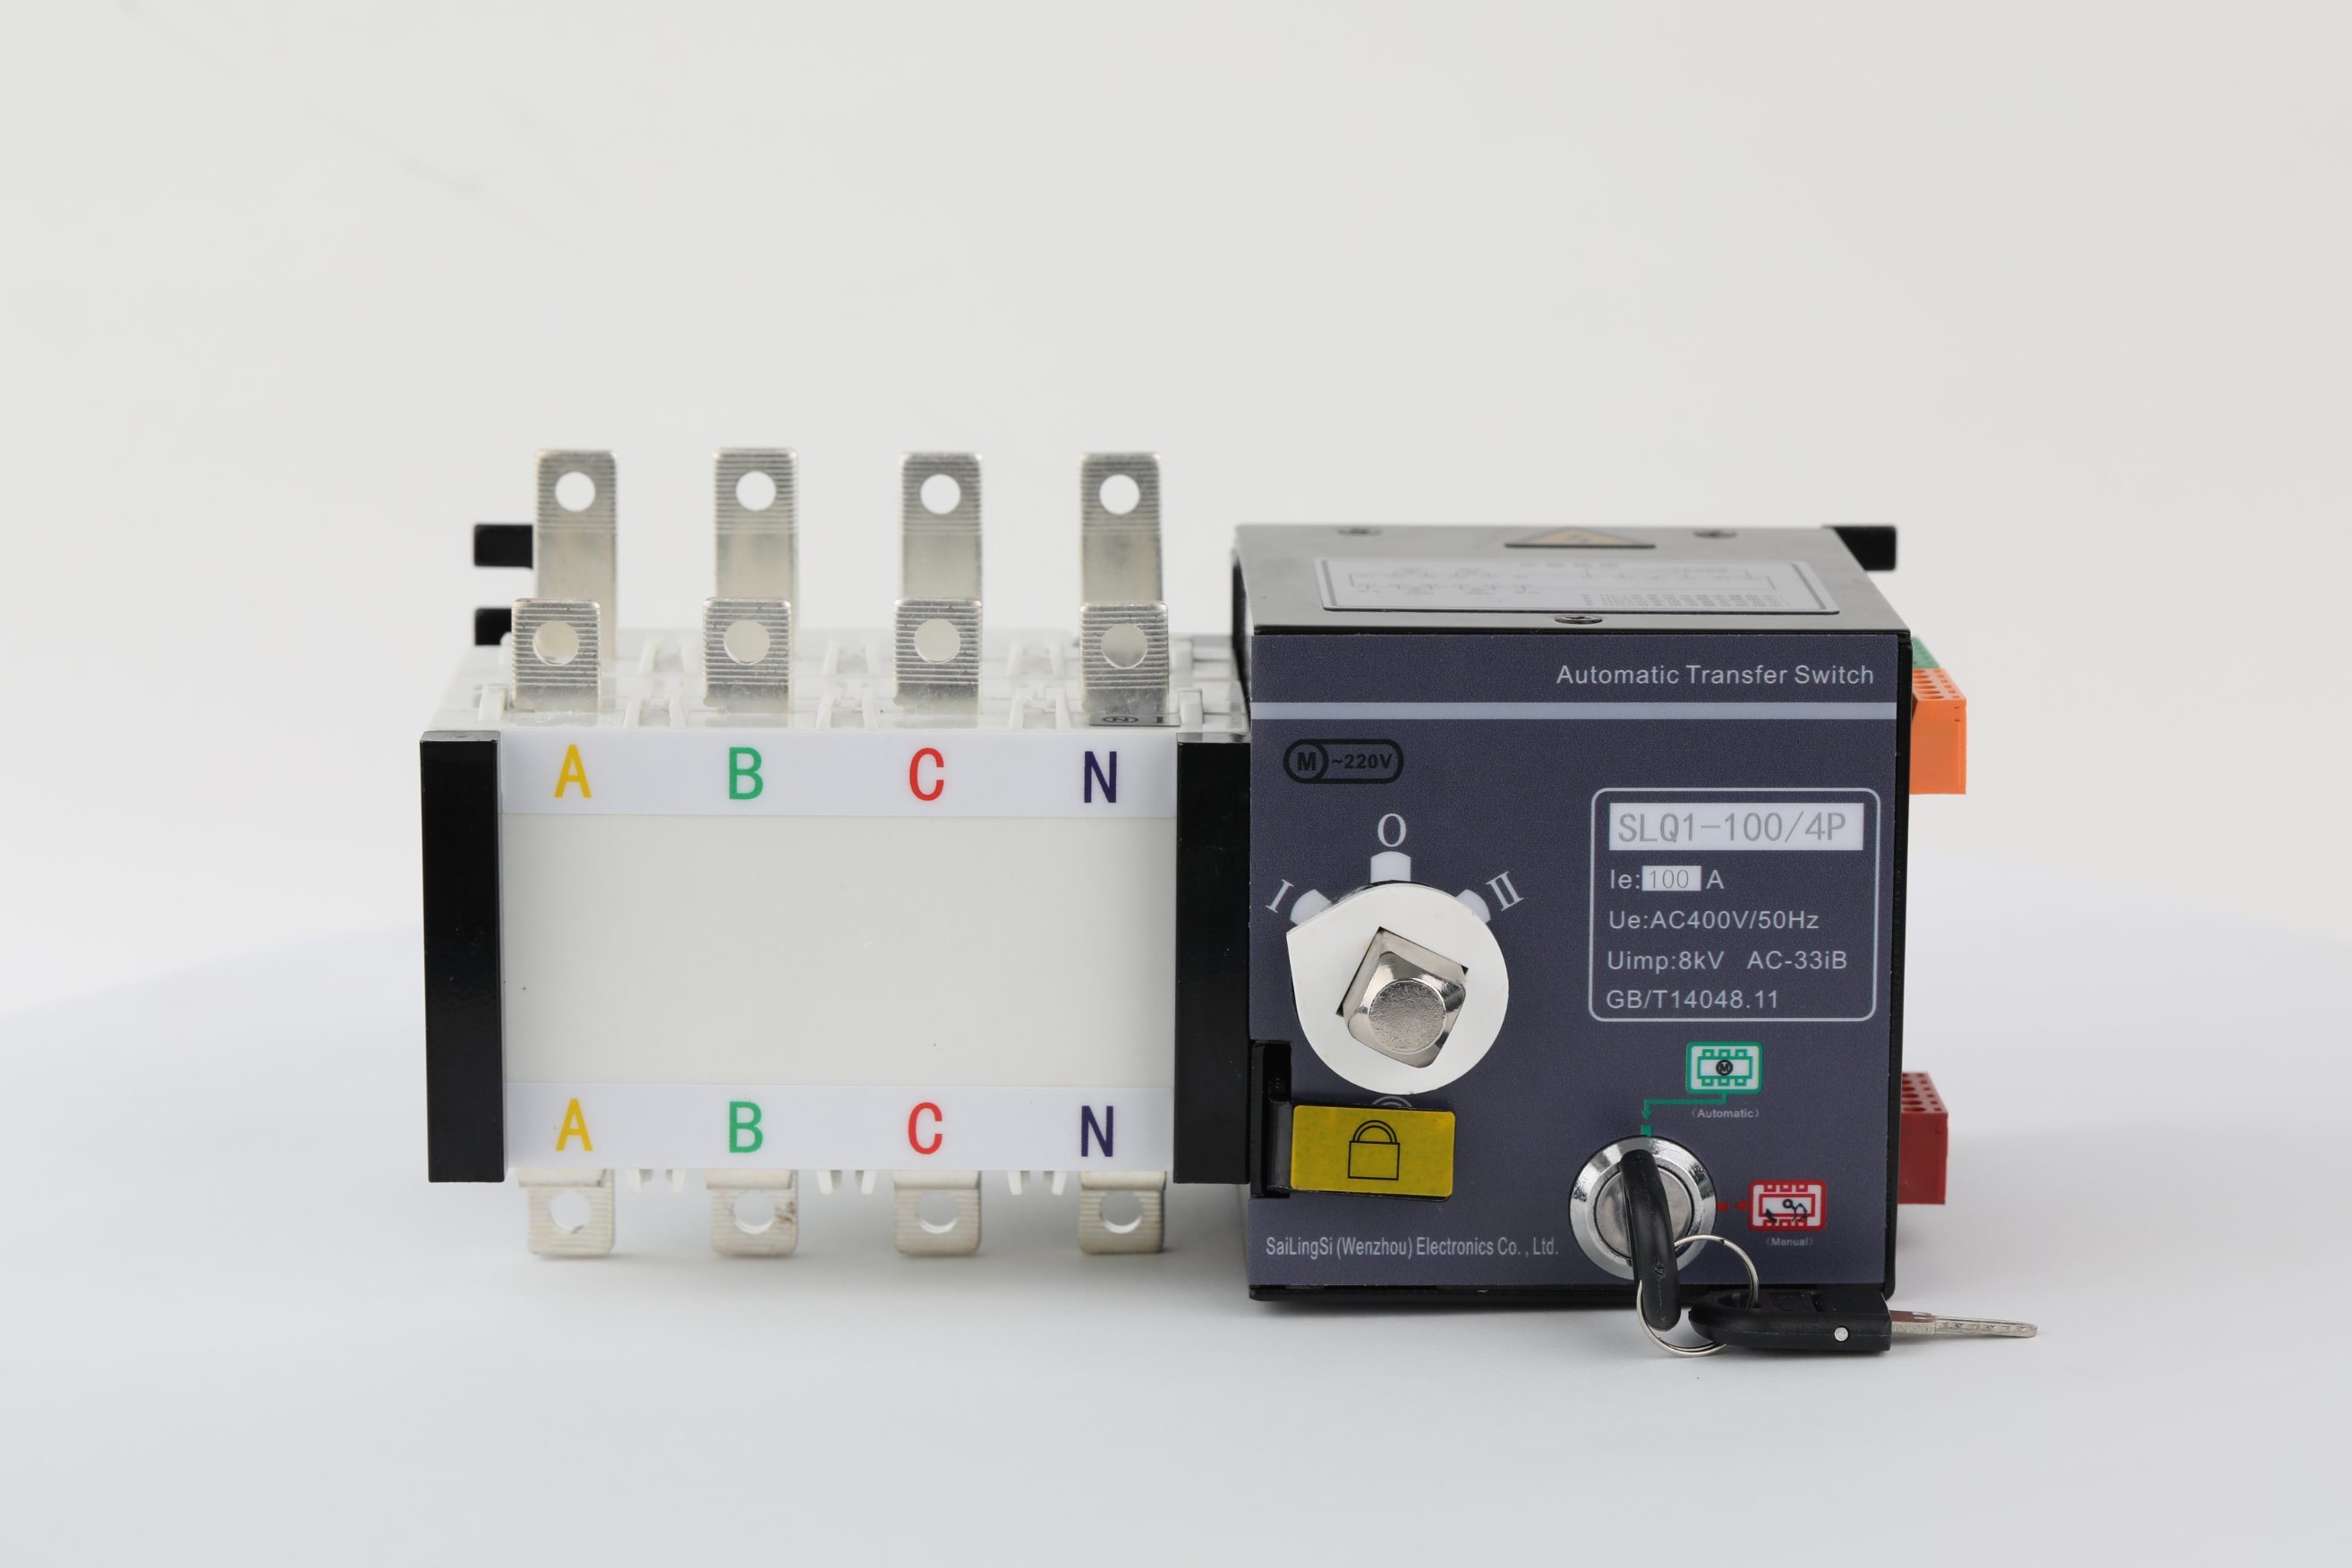 Uvq1-100A 3p ATS 400V 50Hz ATS Self Return Electric Automatic Transfer Switch with Fire Control